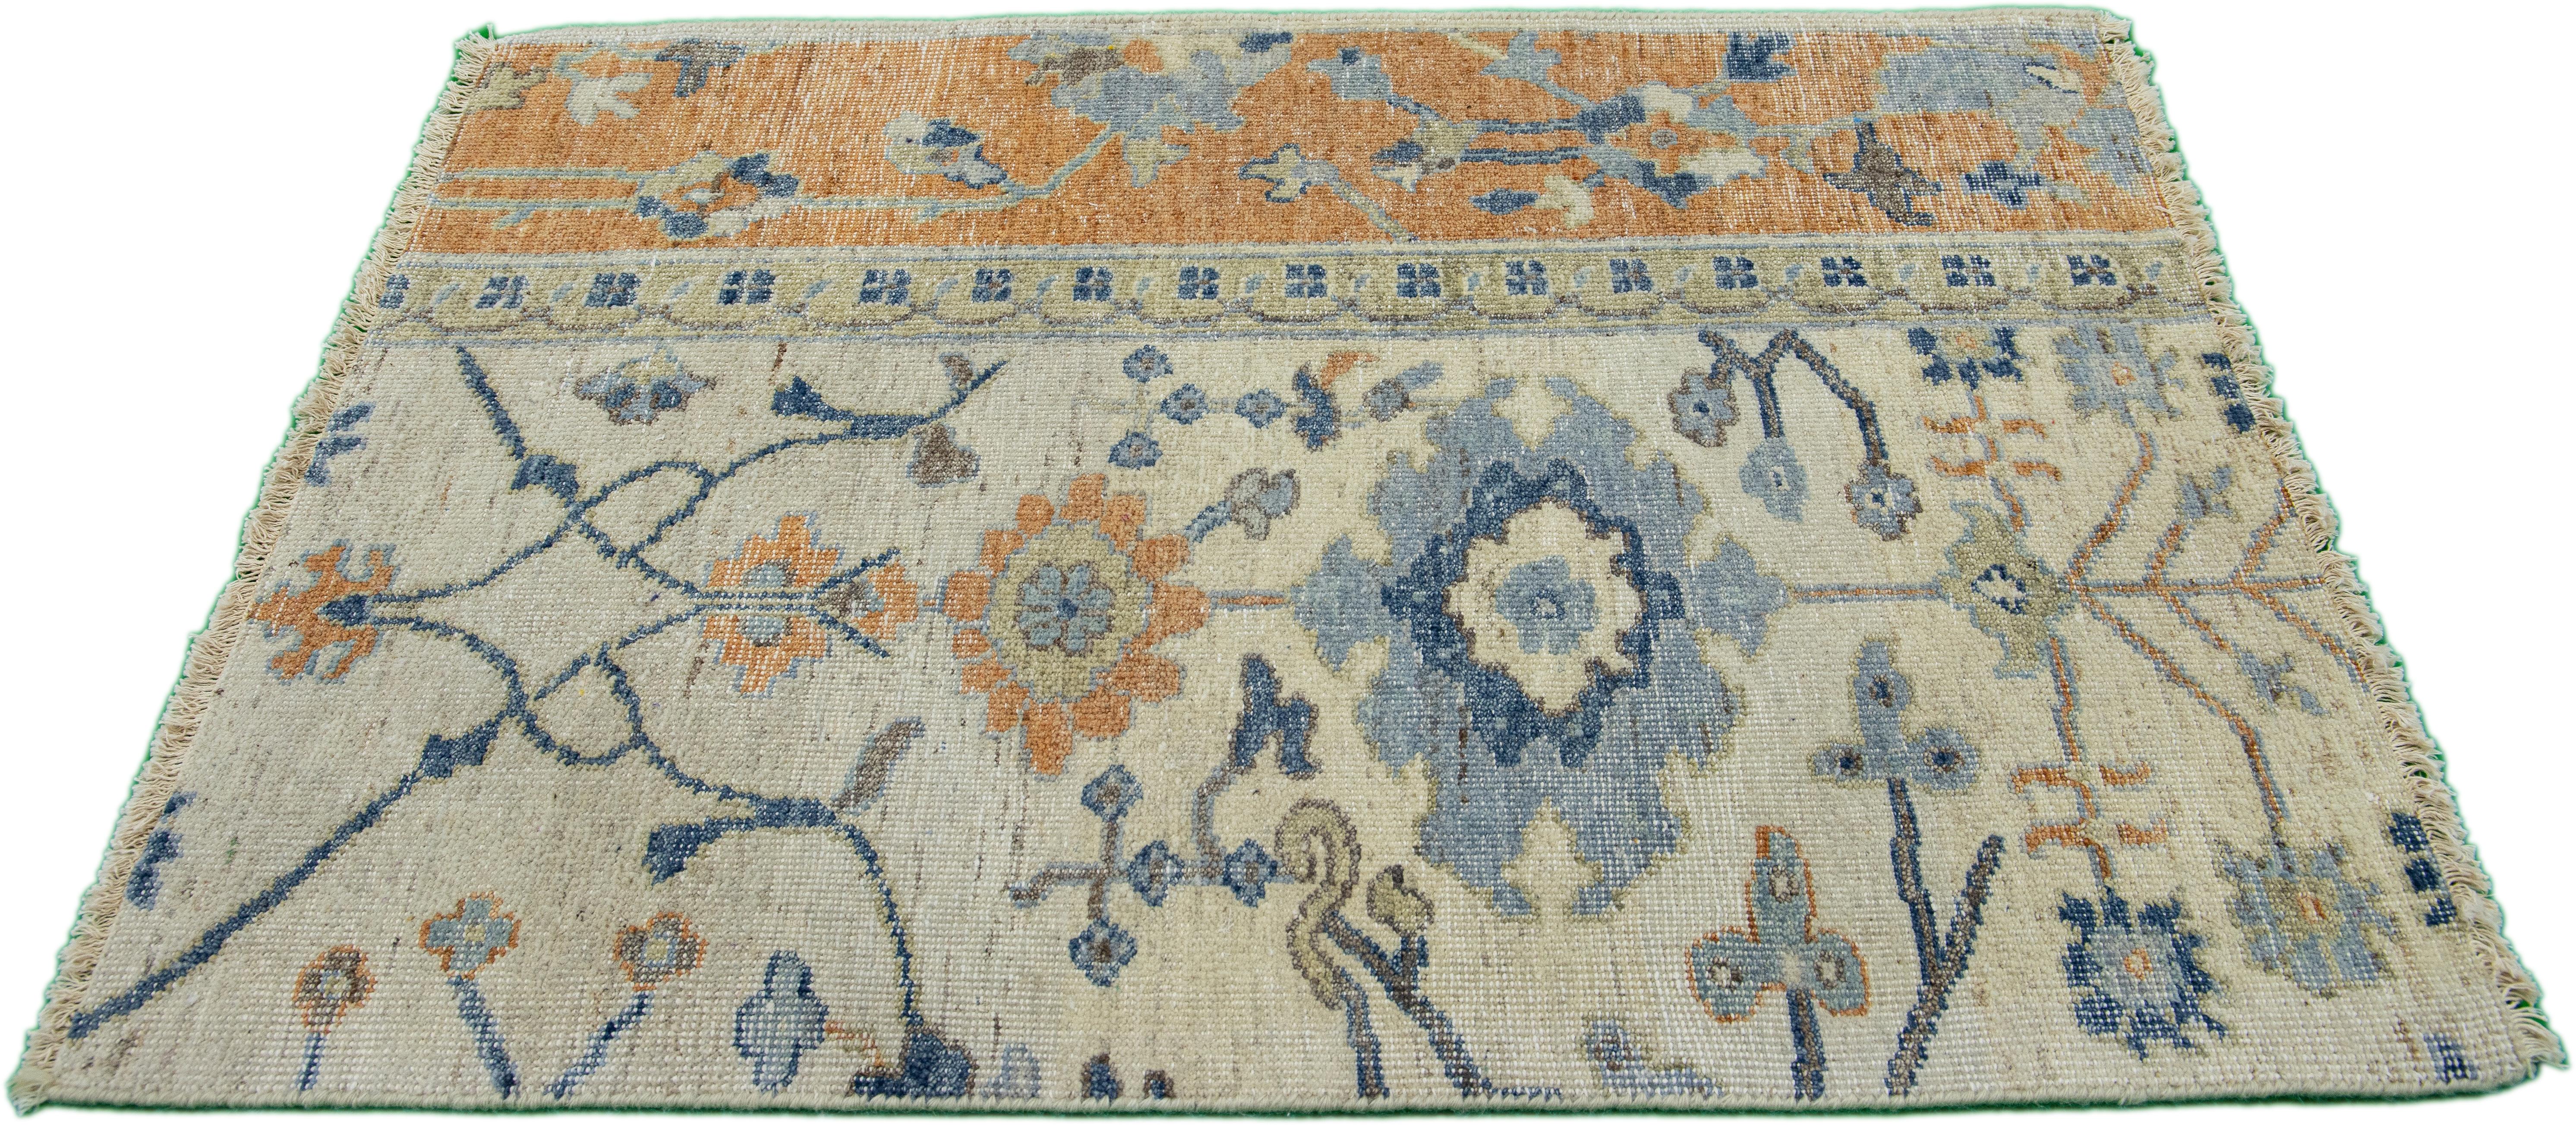 Apadana's Artisan line is an elegant way to inject a striking antique aesthetic into a space. This line of rugs is decidedly unique and reimagines what an antique rug look can be. Every single piece from our Artisan line is painstakingly woven by